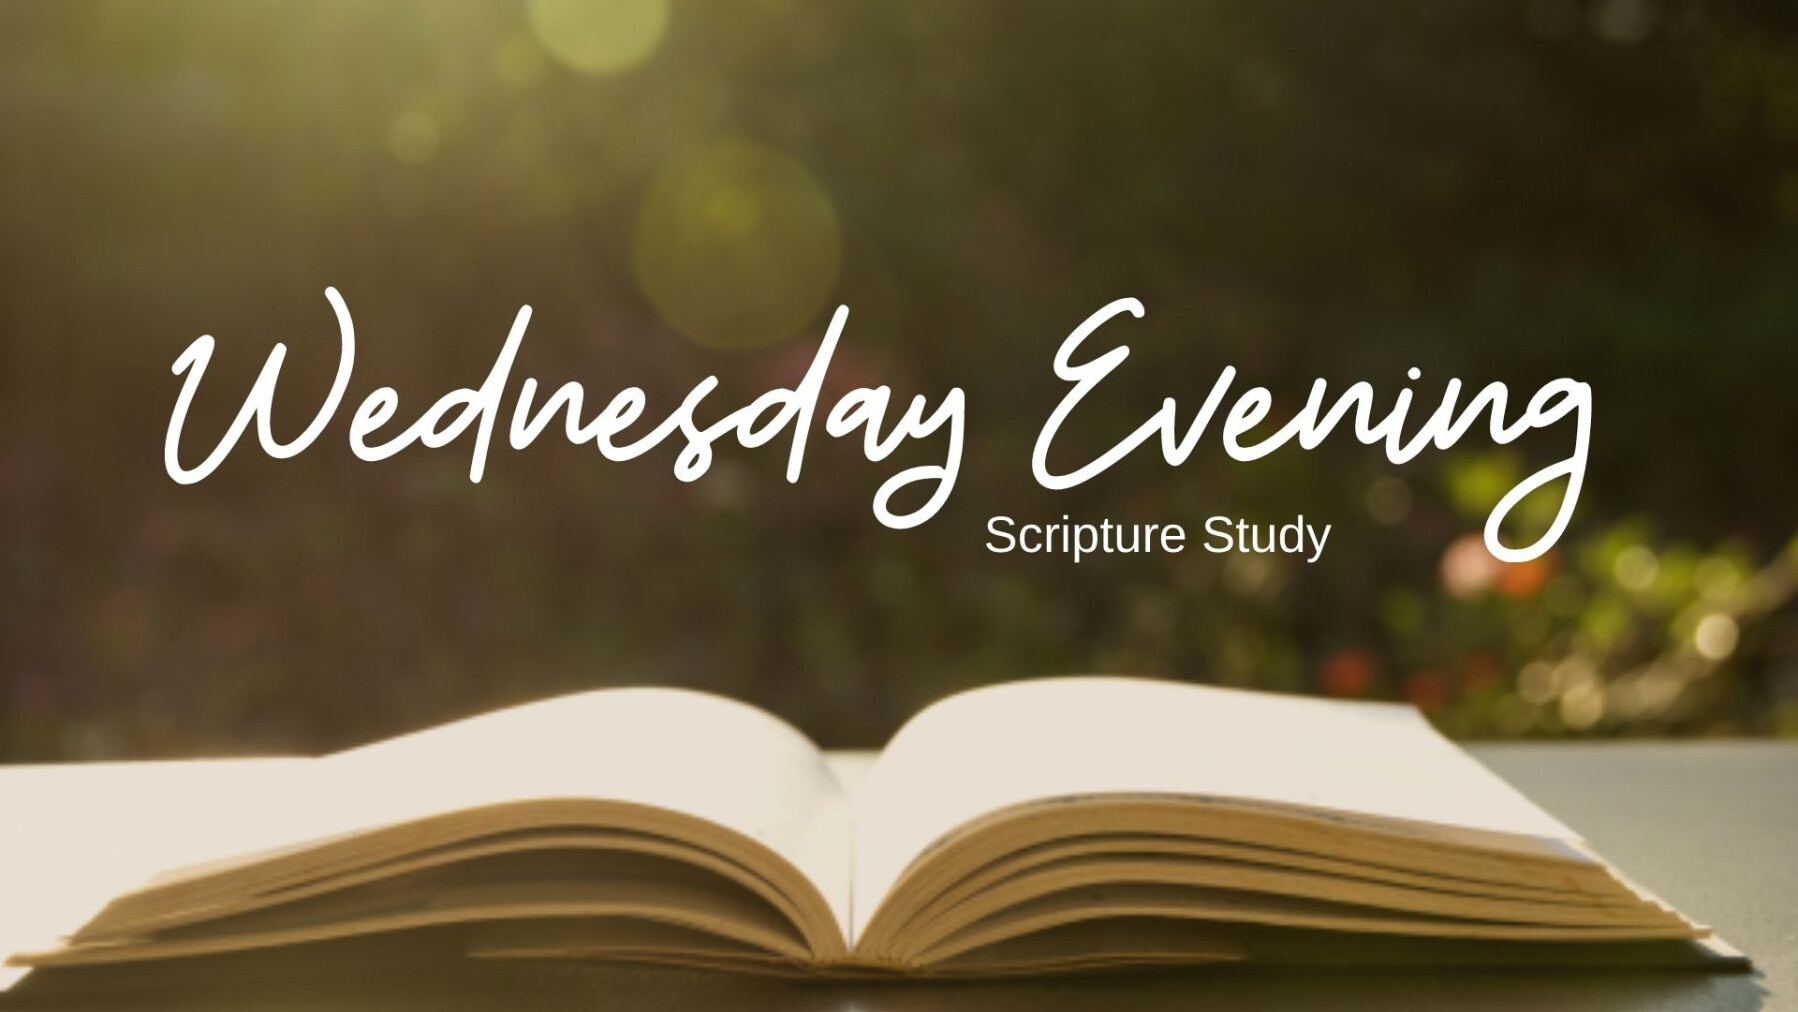 wednesday evening bible study images